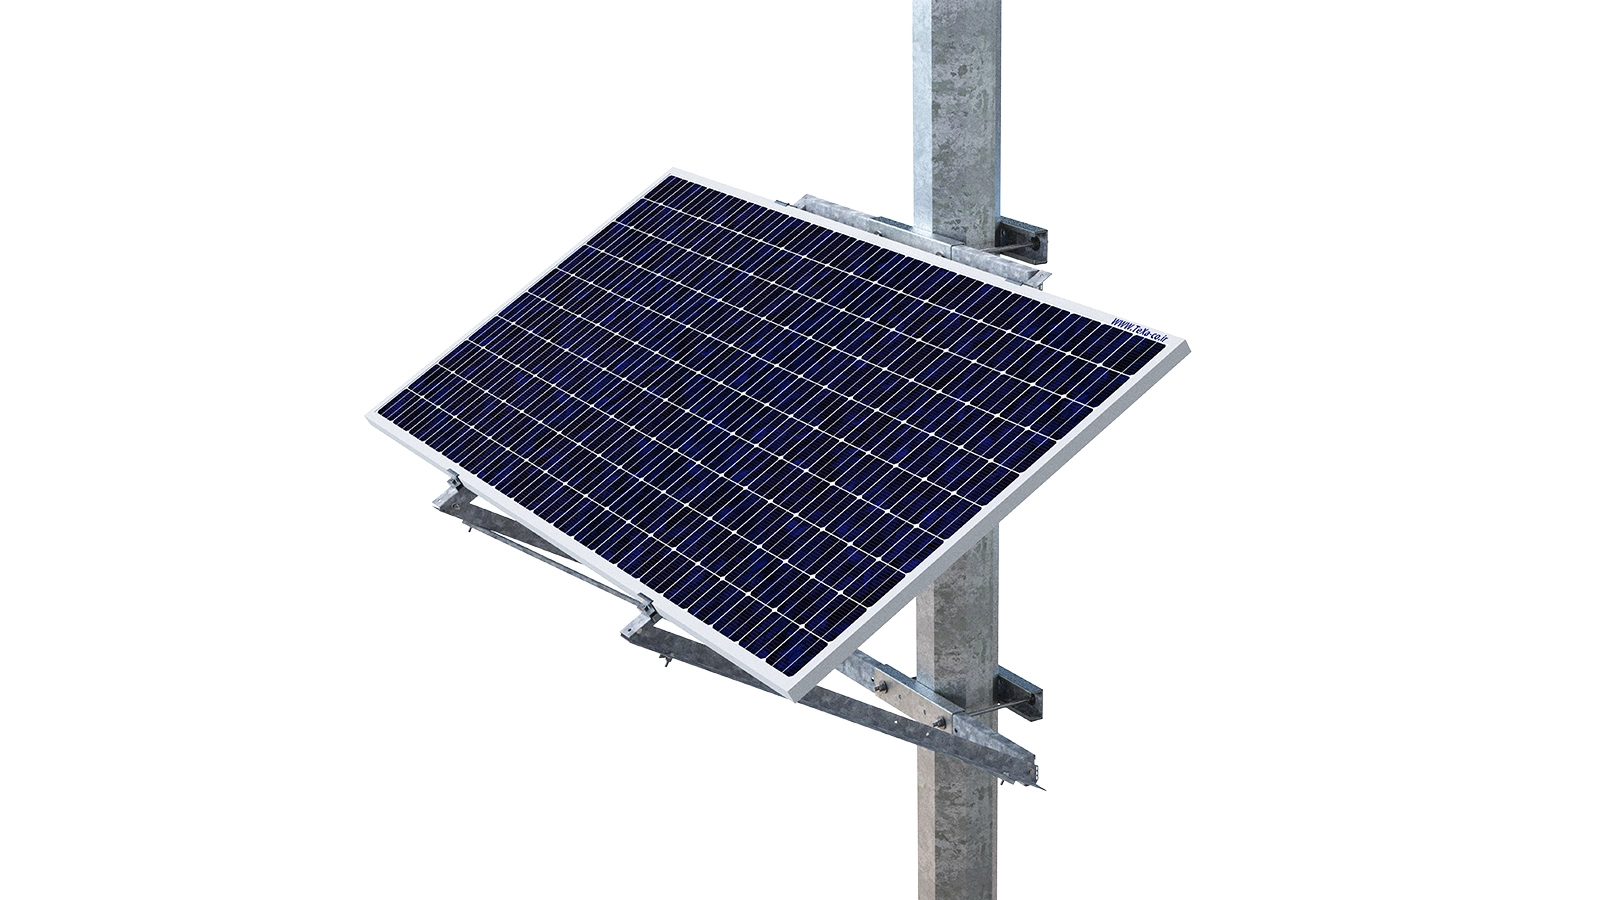 Texa solar panel base model SP from the front view 1